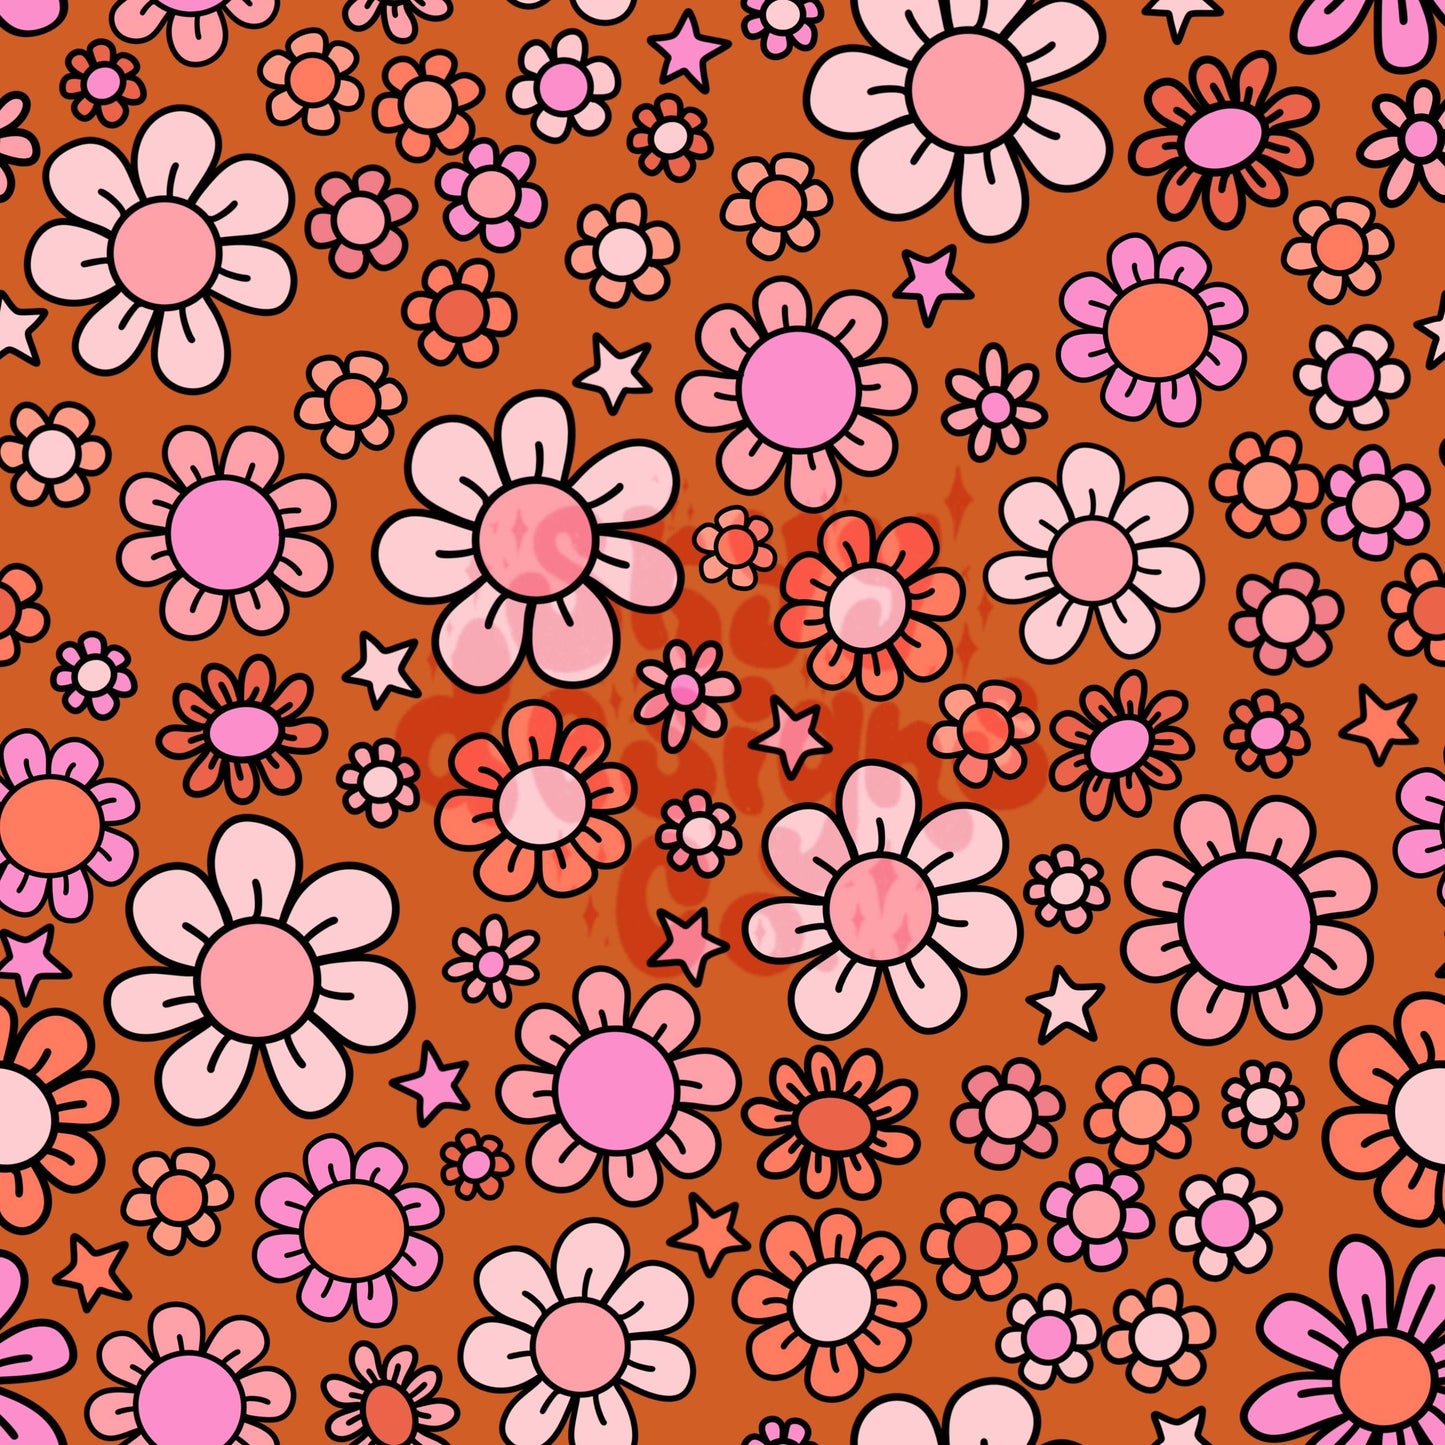 Retro fall floral seamless pattern